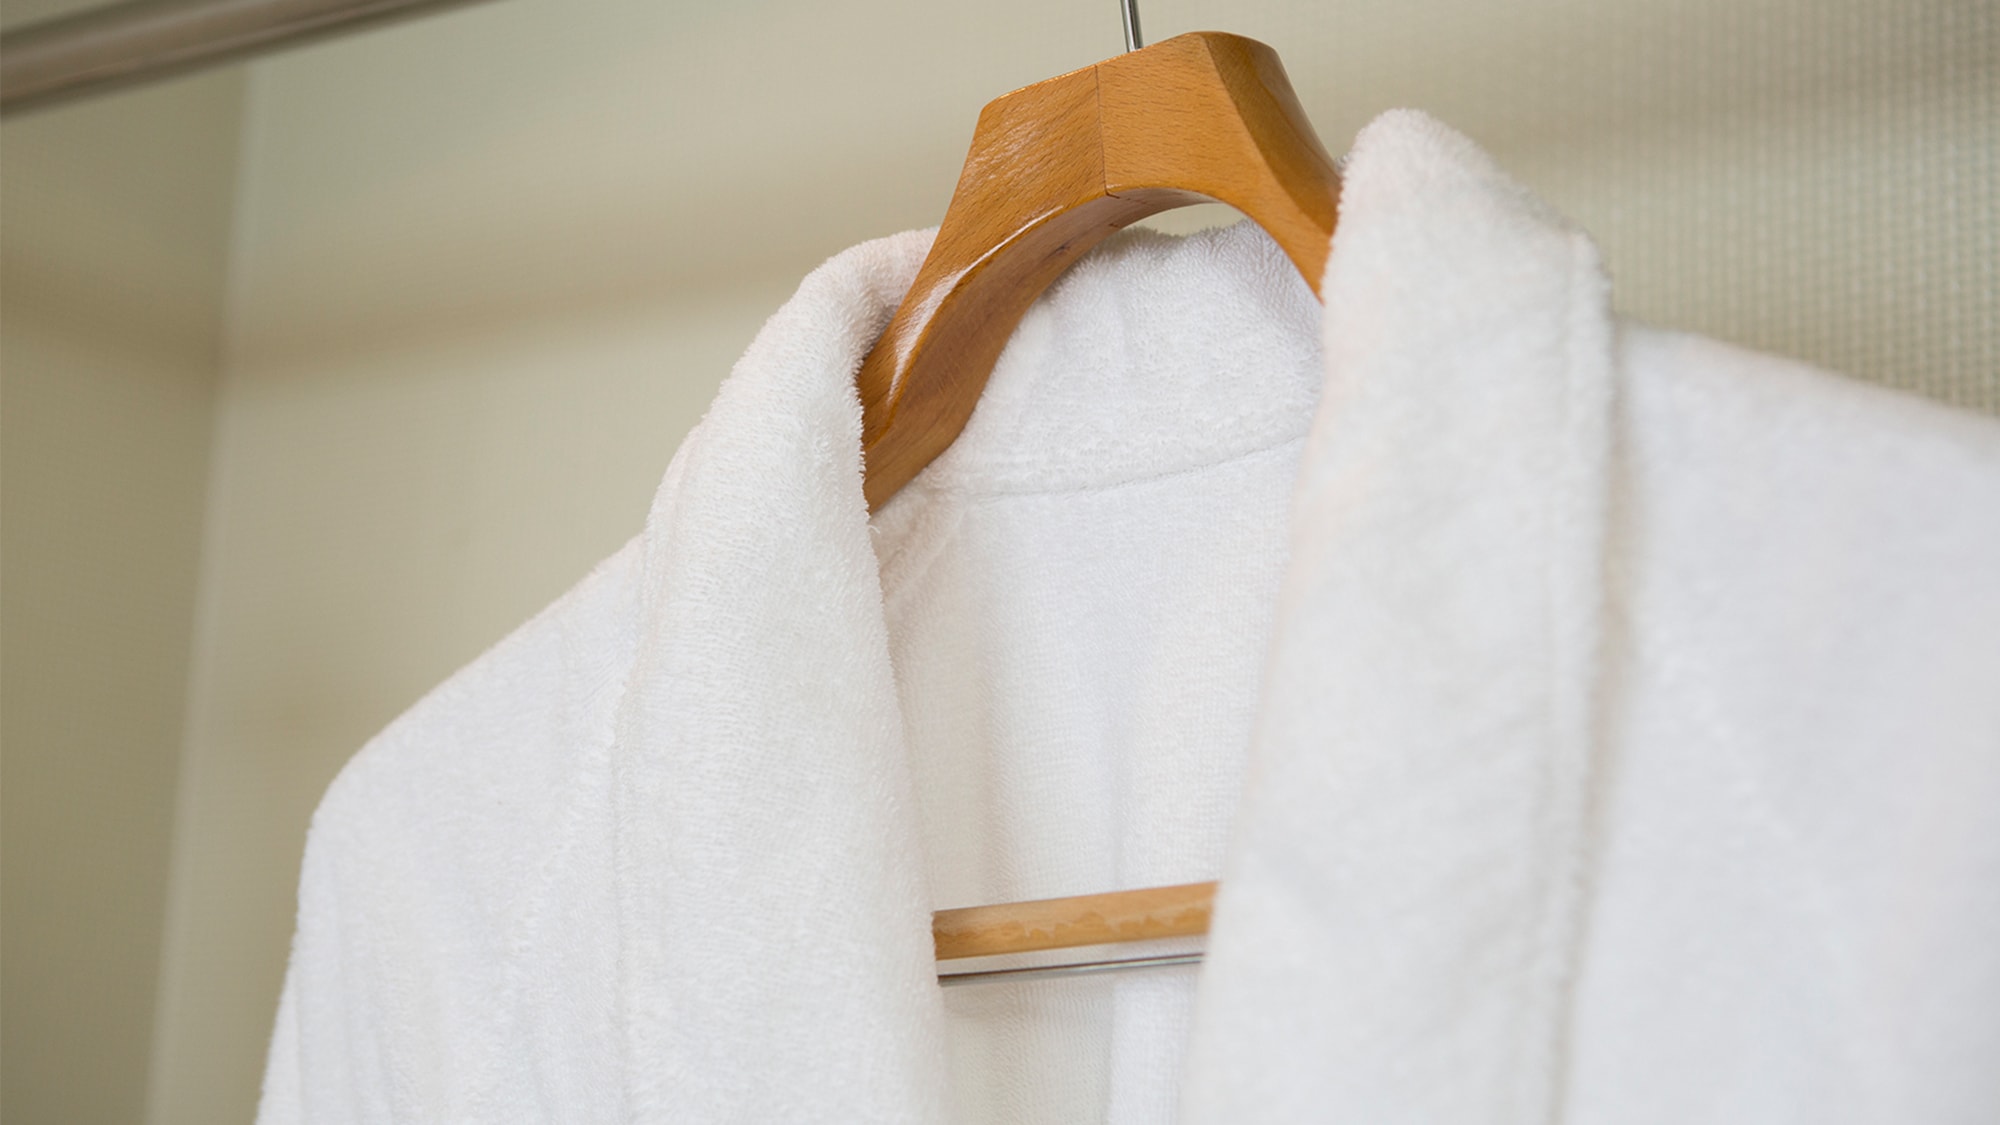 Bathrobes are provided in rooms of 58 and 68 square meters in First Class and Business Class.